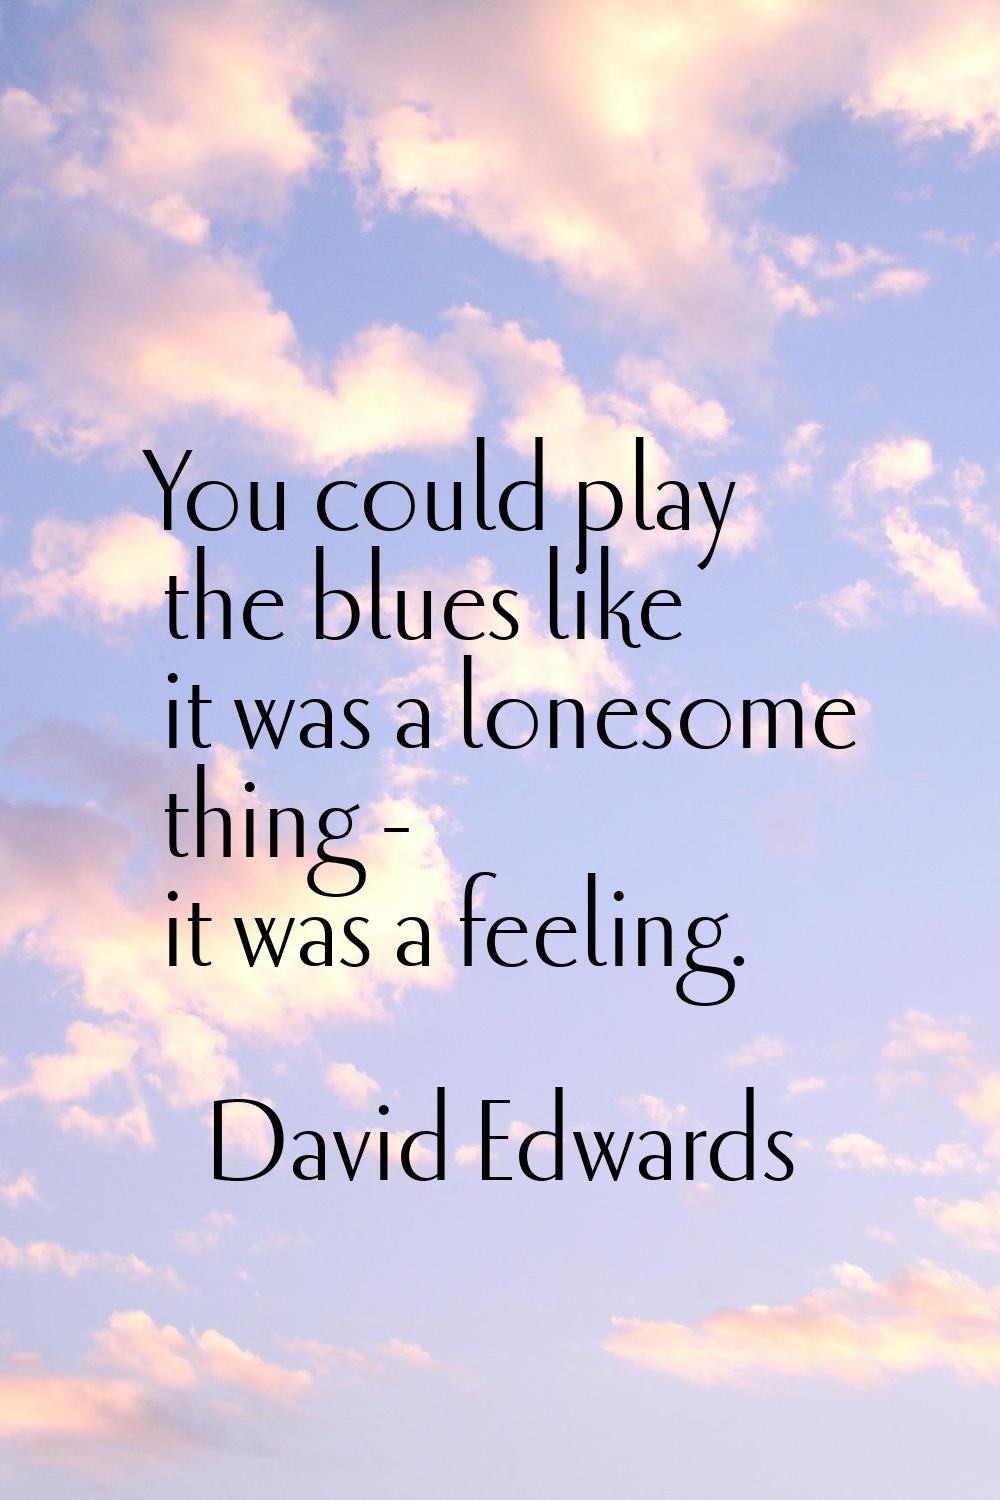 You could play the blues like it was a lonesome thing - it was a feeling.